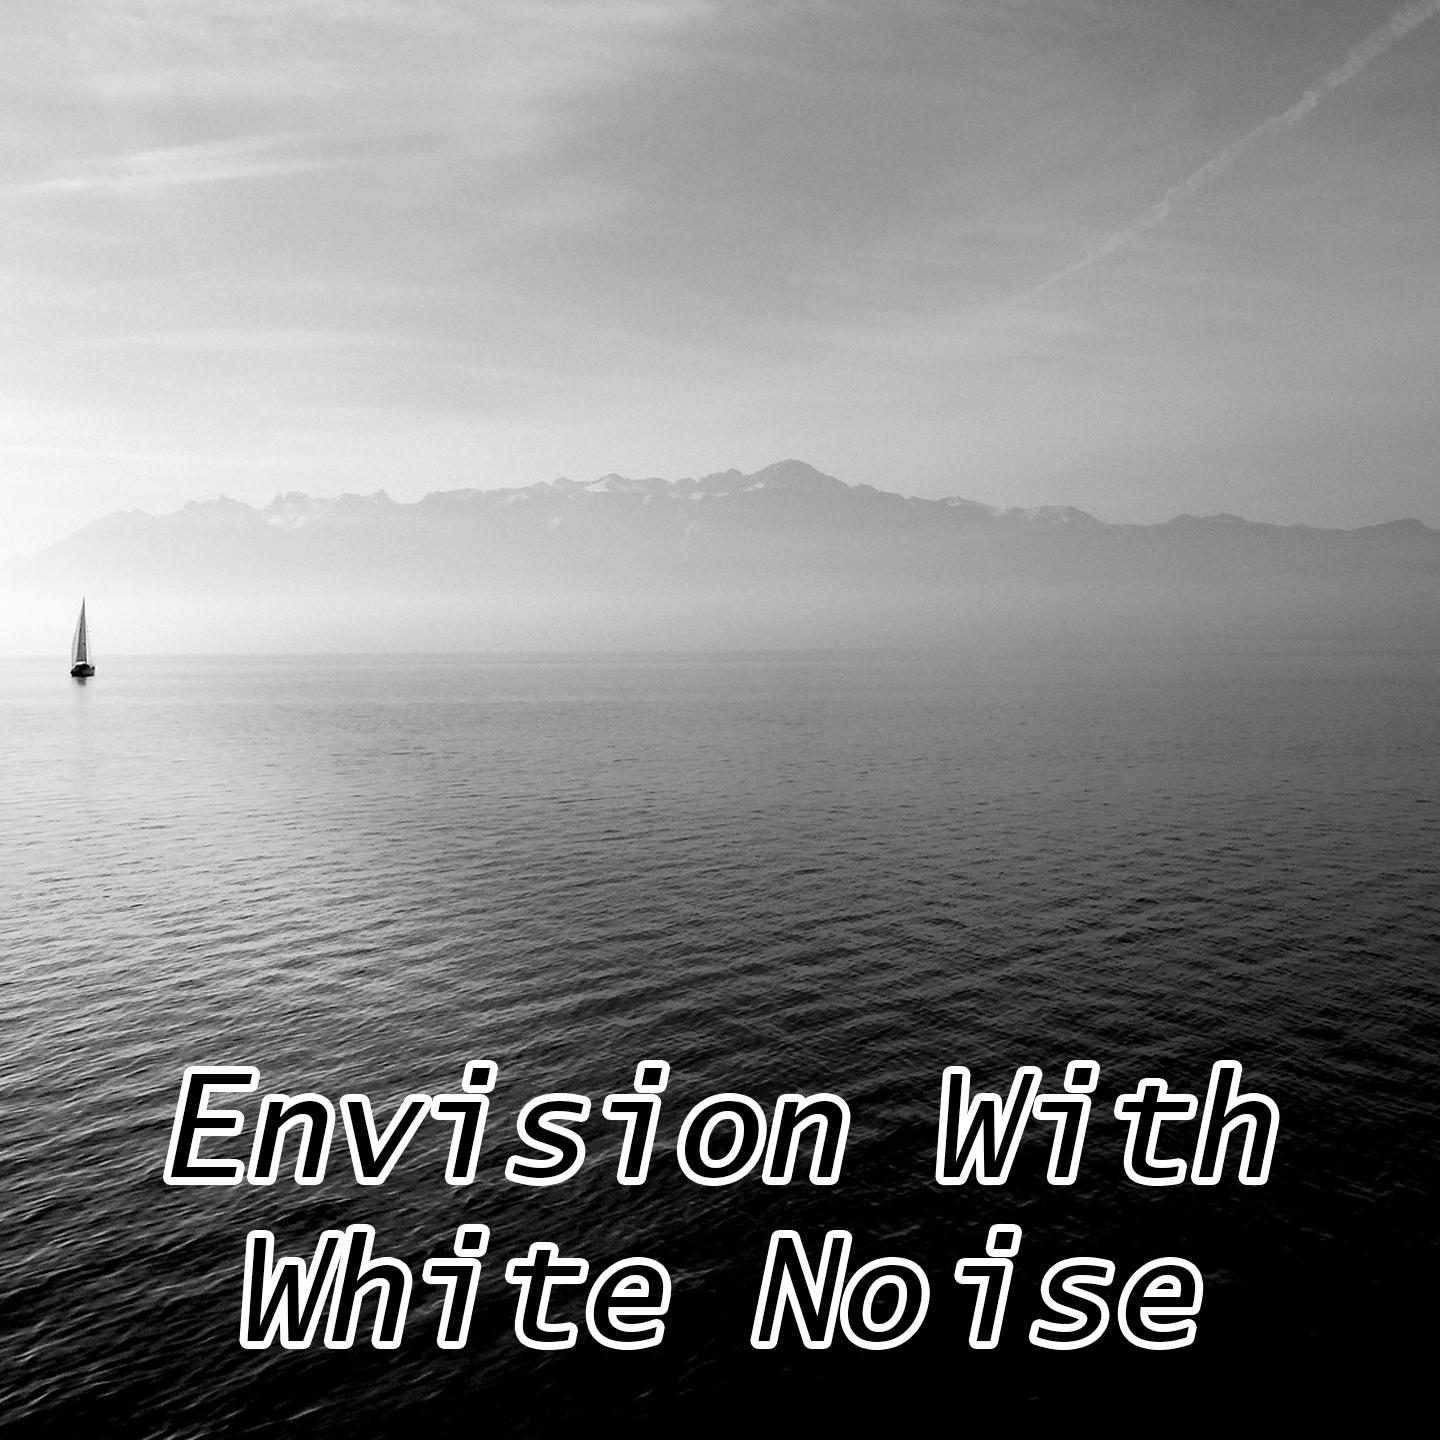 Envision With White Noise